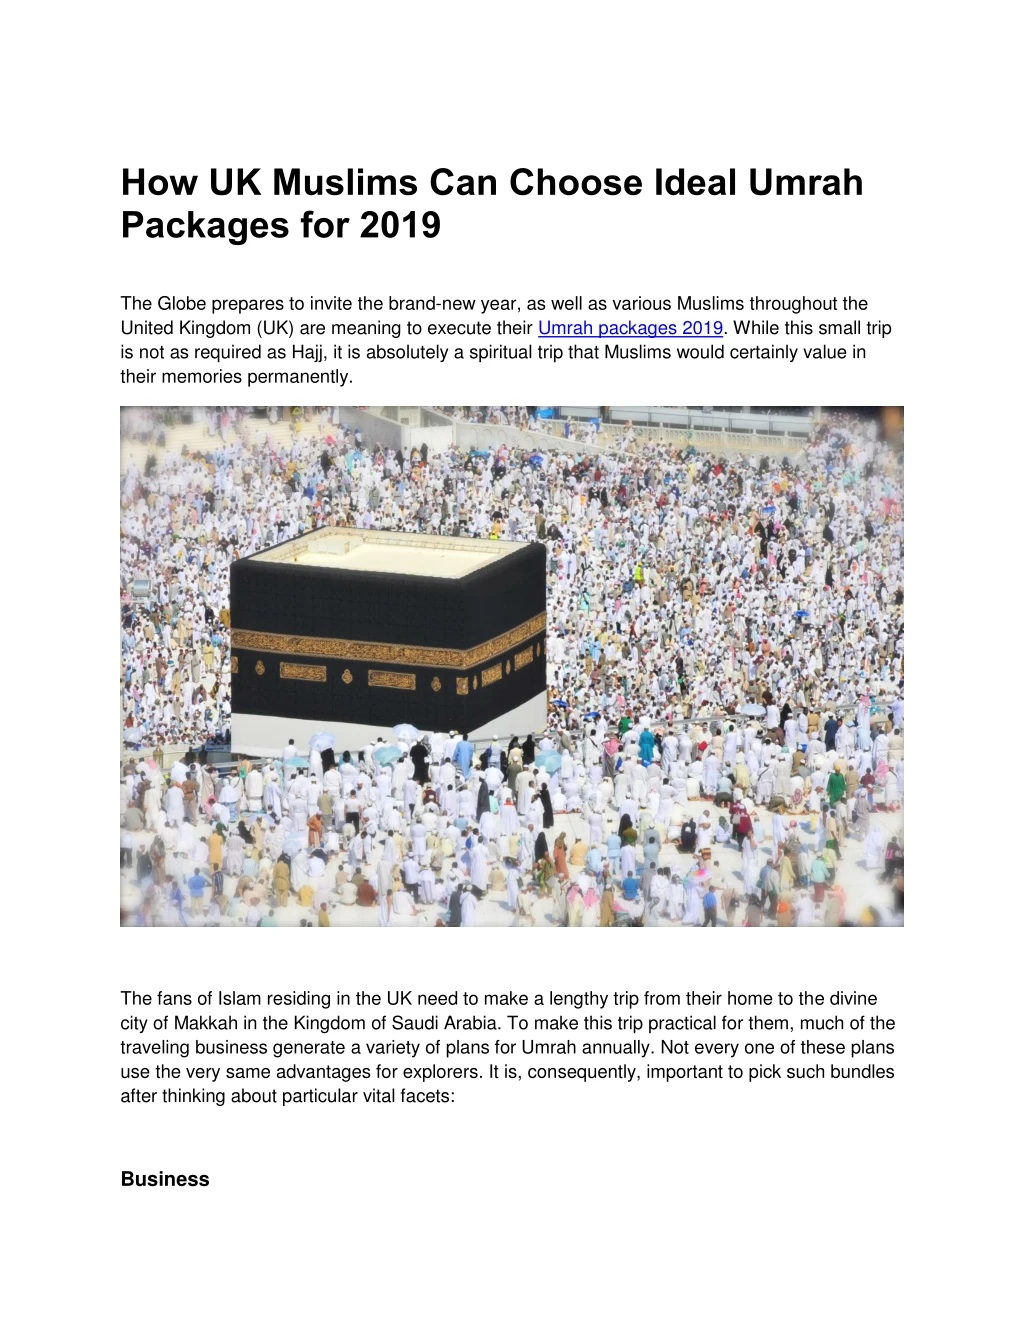 how uk muslims can choose ideal umrah packages